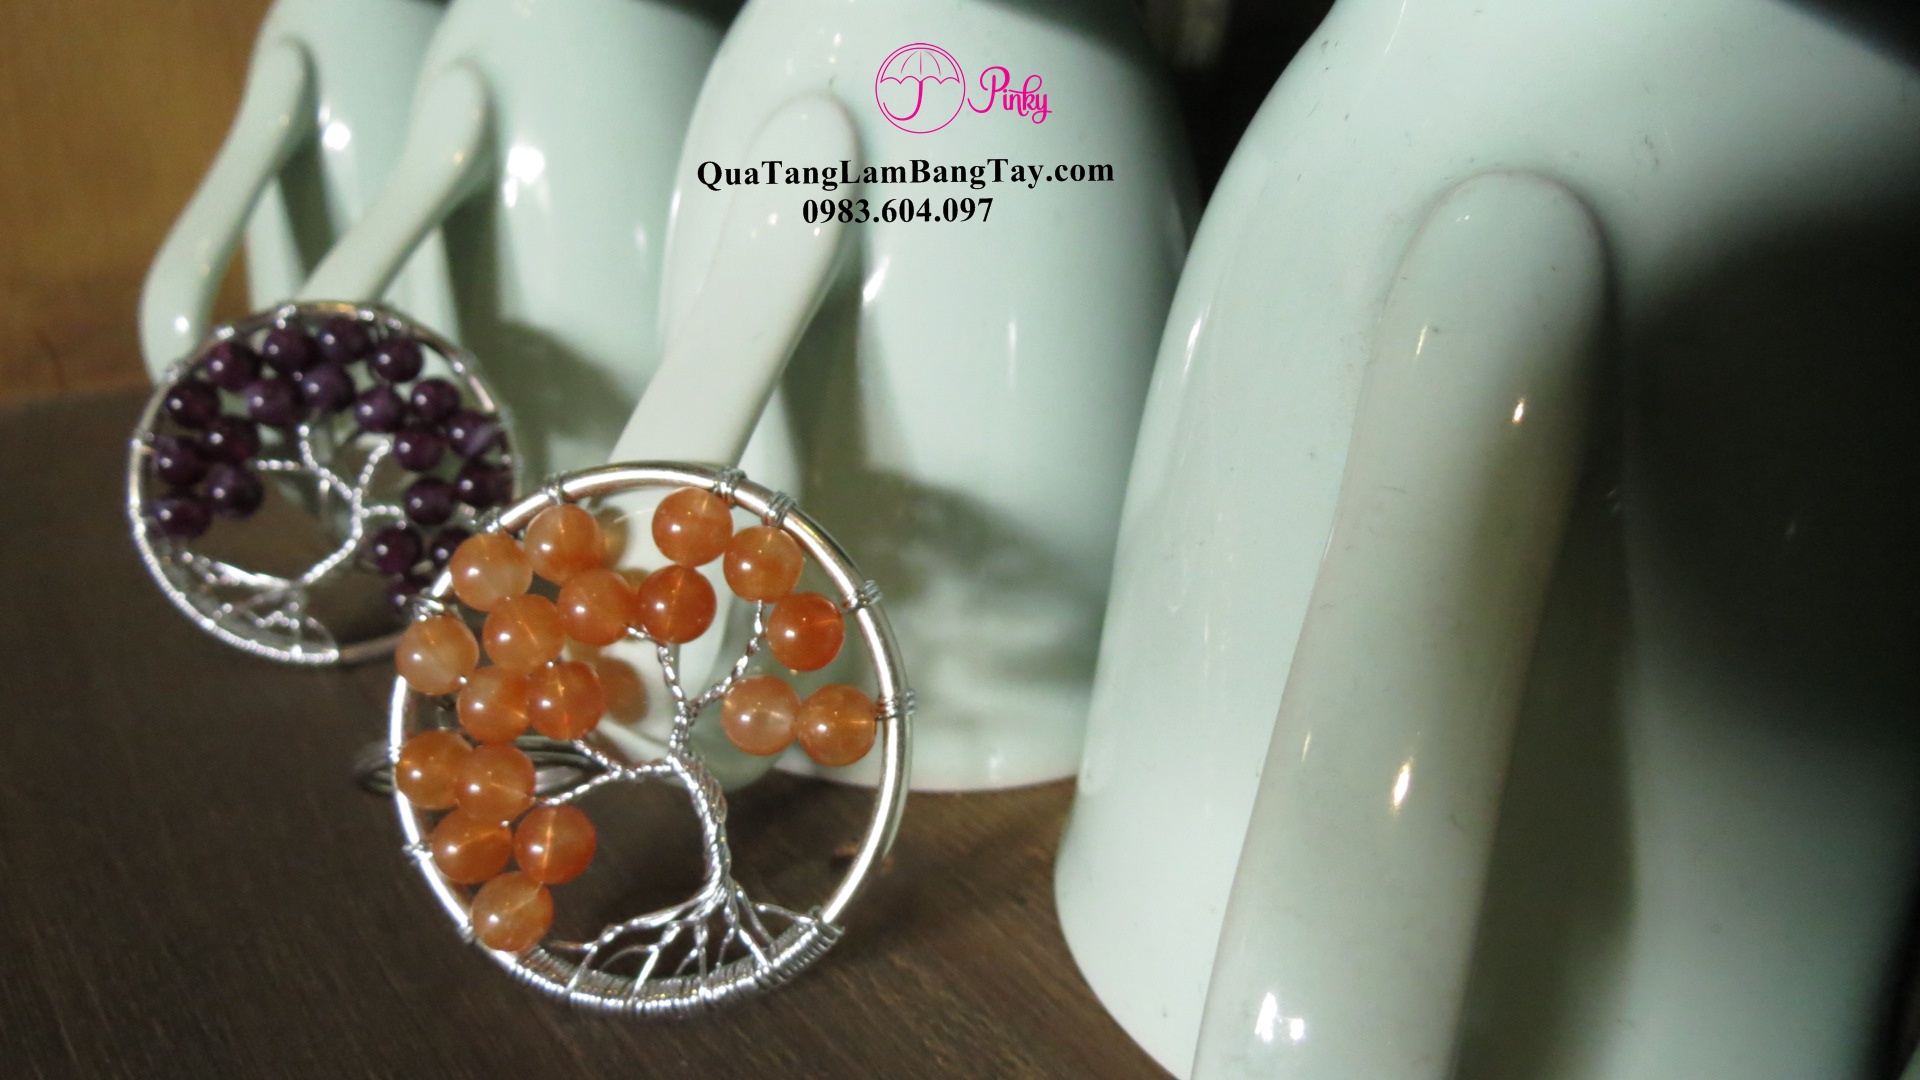 tree of life, tree of life handmade, handmade tree of life, mua tree of life, nguyên liệu làm tree of life